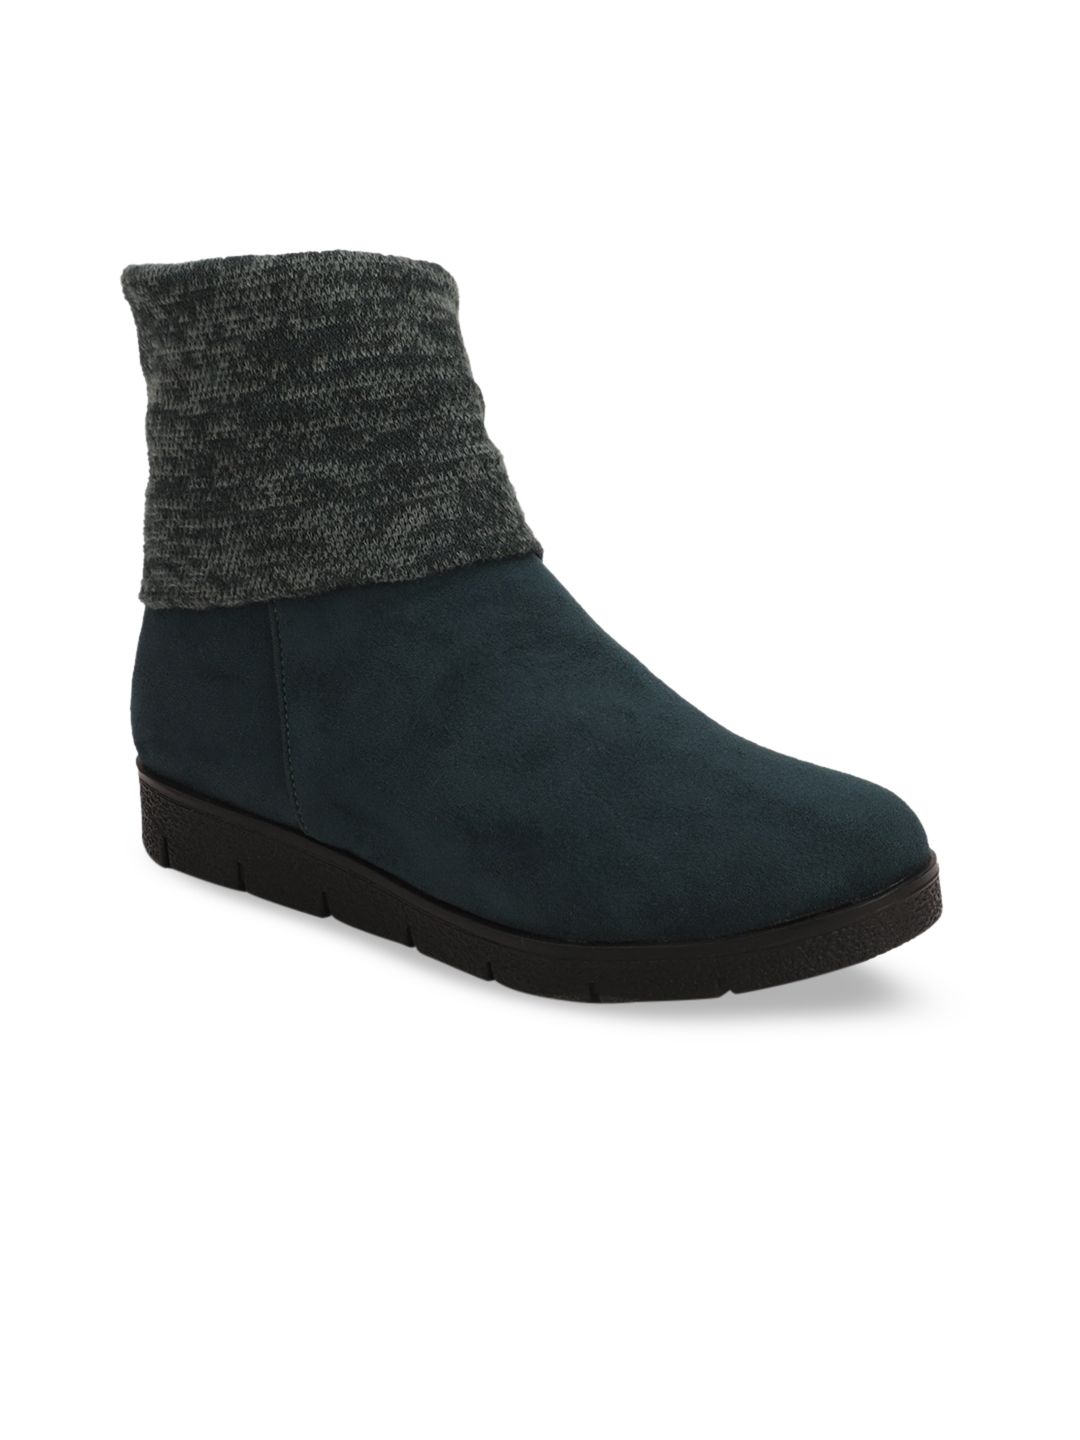 Mast & Harbour Women Green Textured Suede Monks Price in India